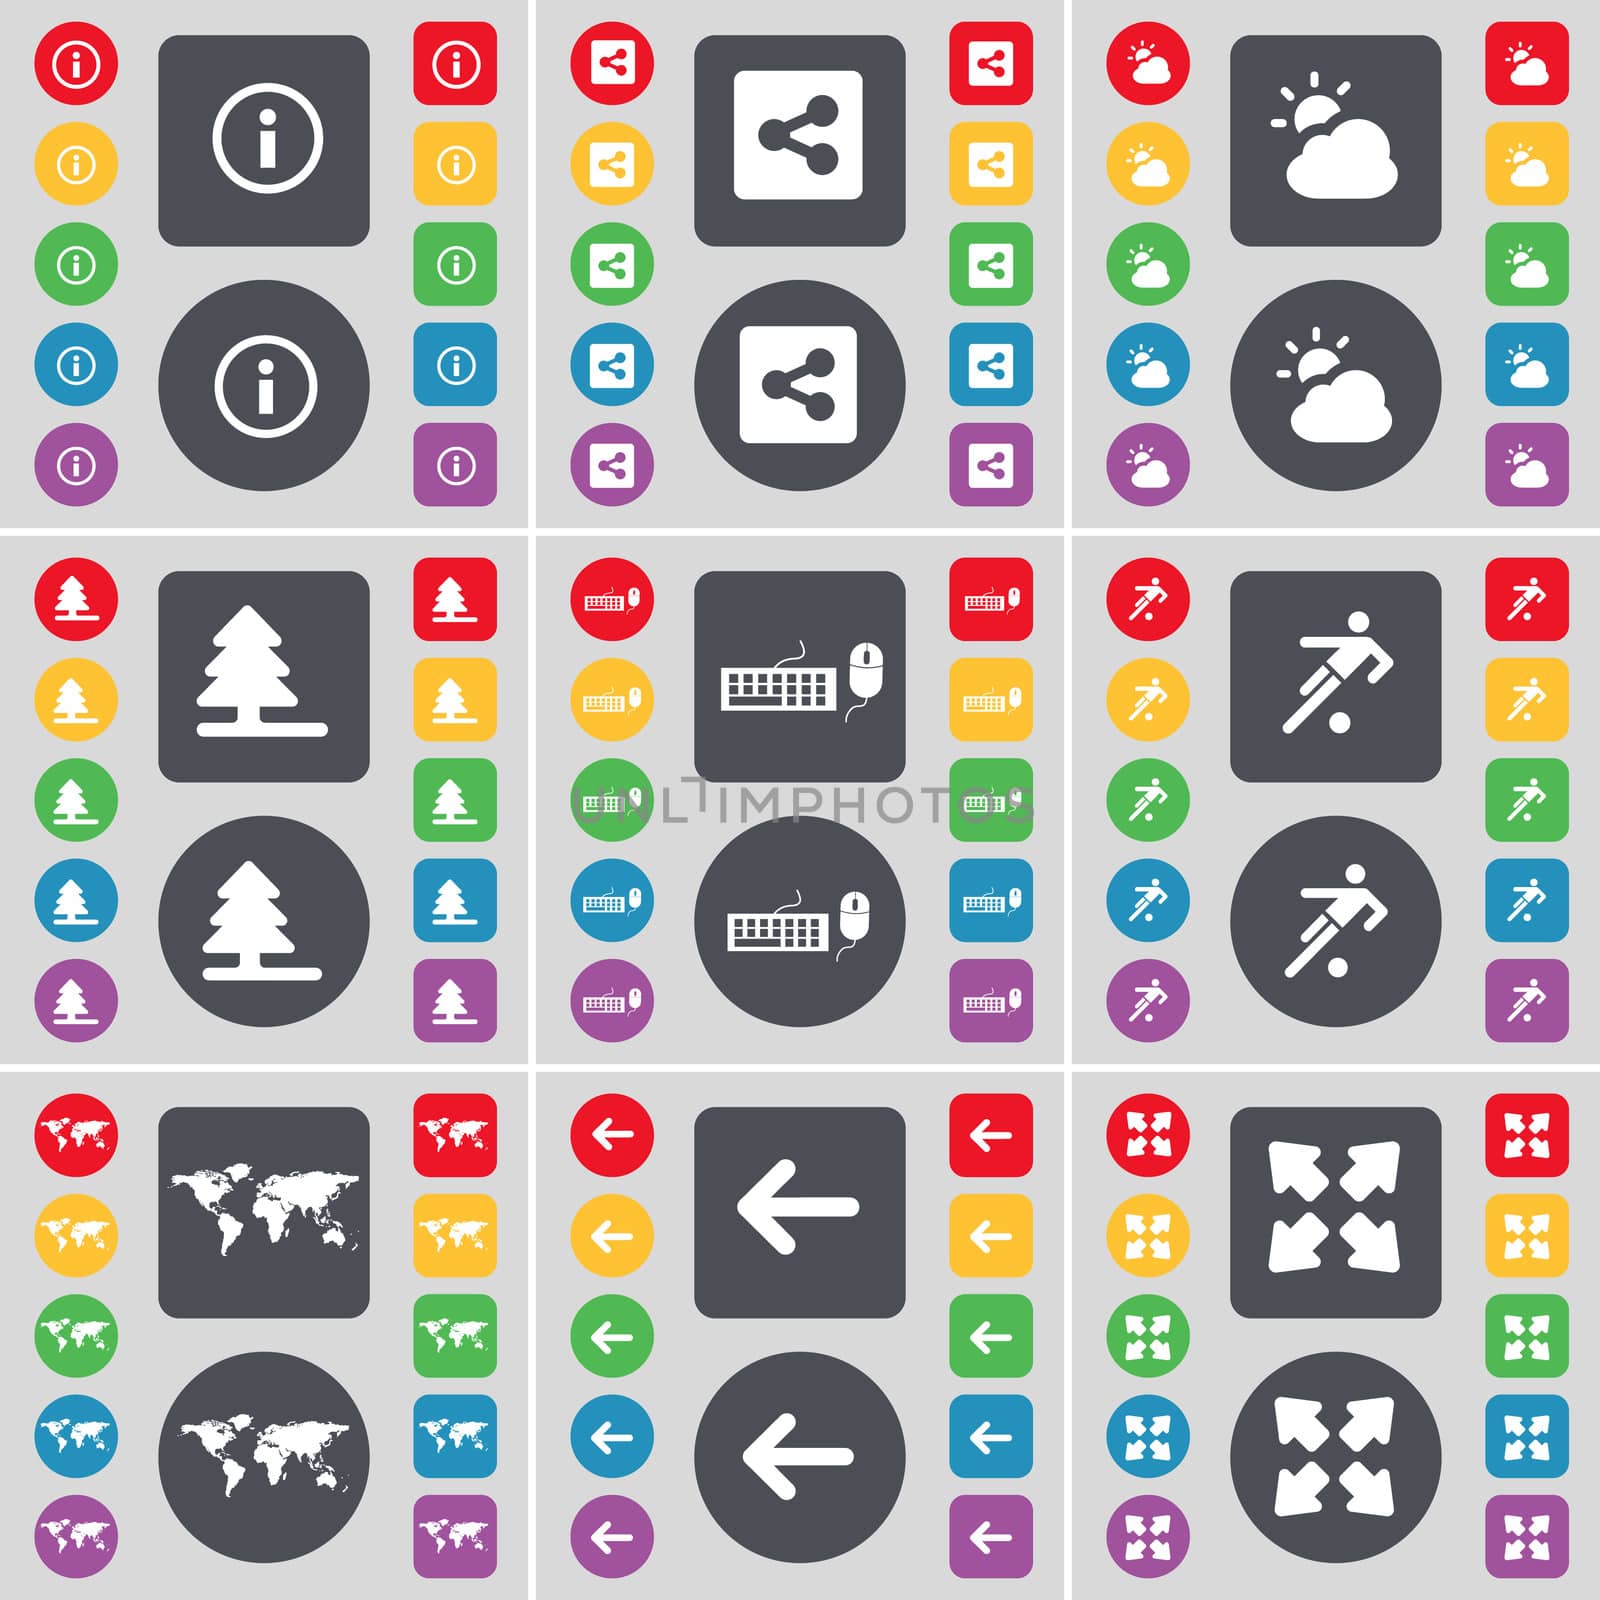 Information mark, Share, Cloud, Firtree, Keyboard, Football, Globe, Arrow left, Full screen icon symbol. A large set of flat, colored buttons for your design. illustration